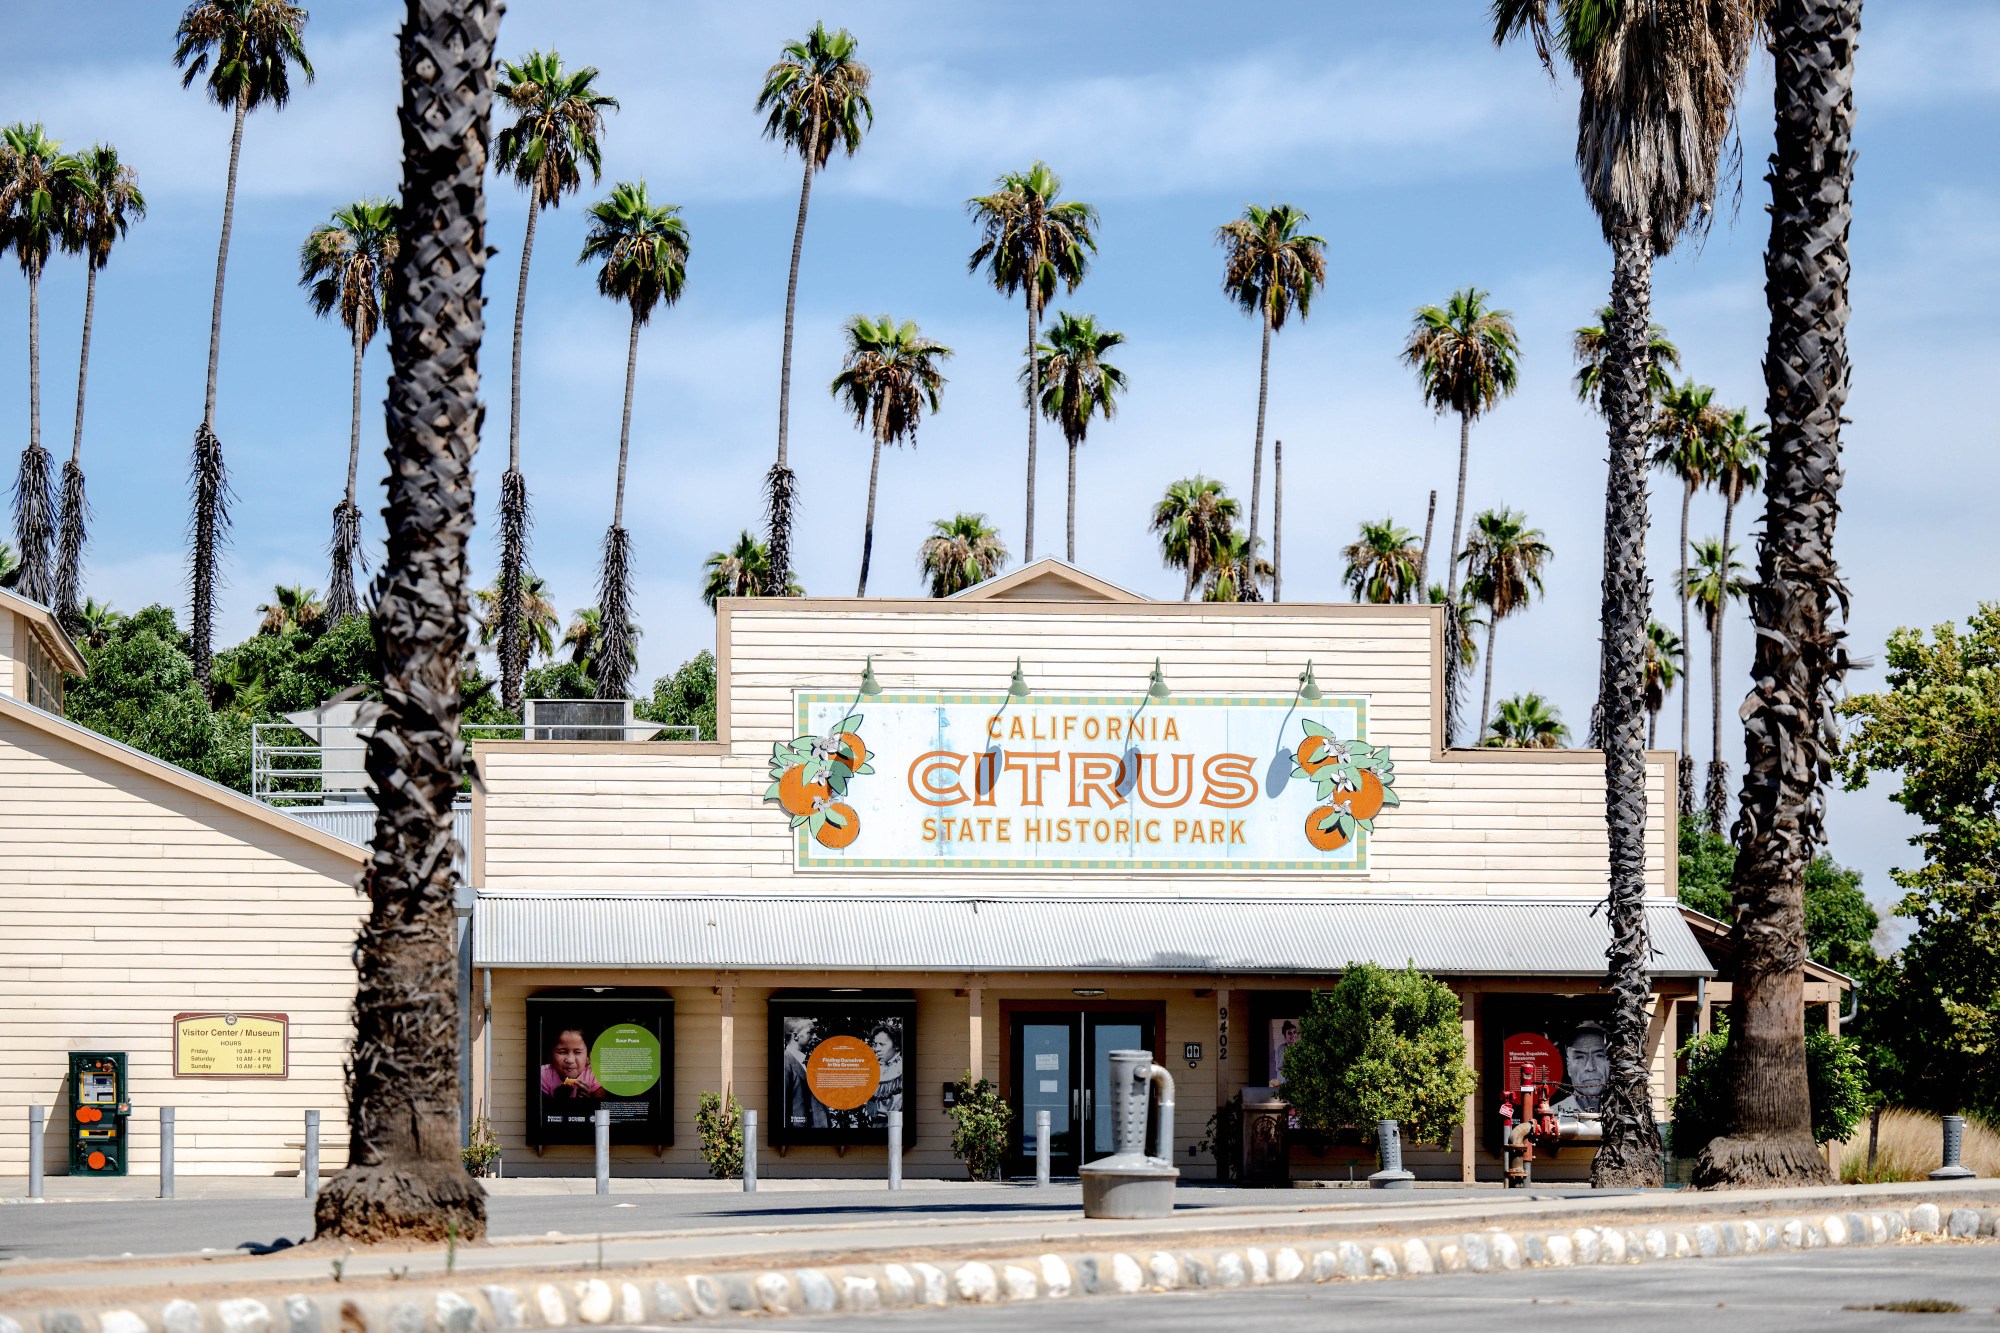 The California Citrus State Historic Park in Riverside, seen July 21, 2022, will be the site of a Nov. 5 event celebrating citrus with food, craft vendors, games and more. (File photo by Watchara Phomicinda, The Press-Enterprise/SCNG)